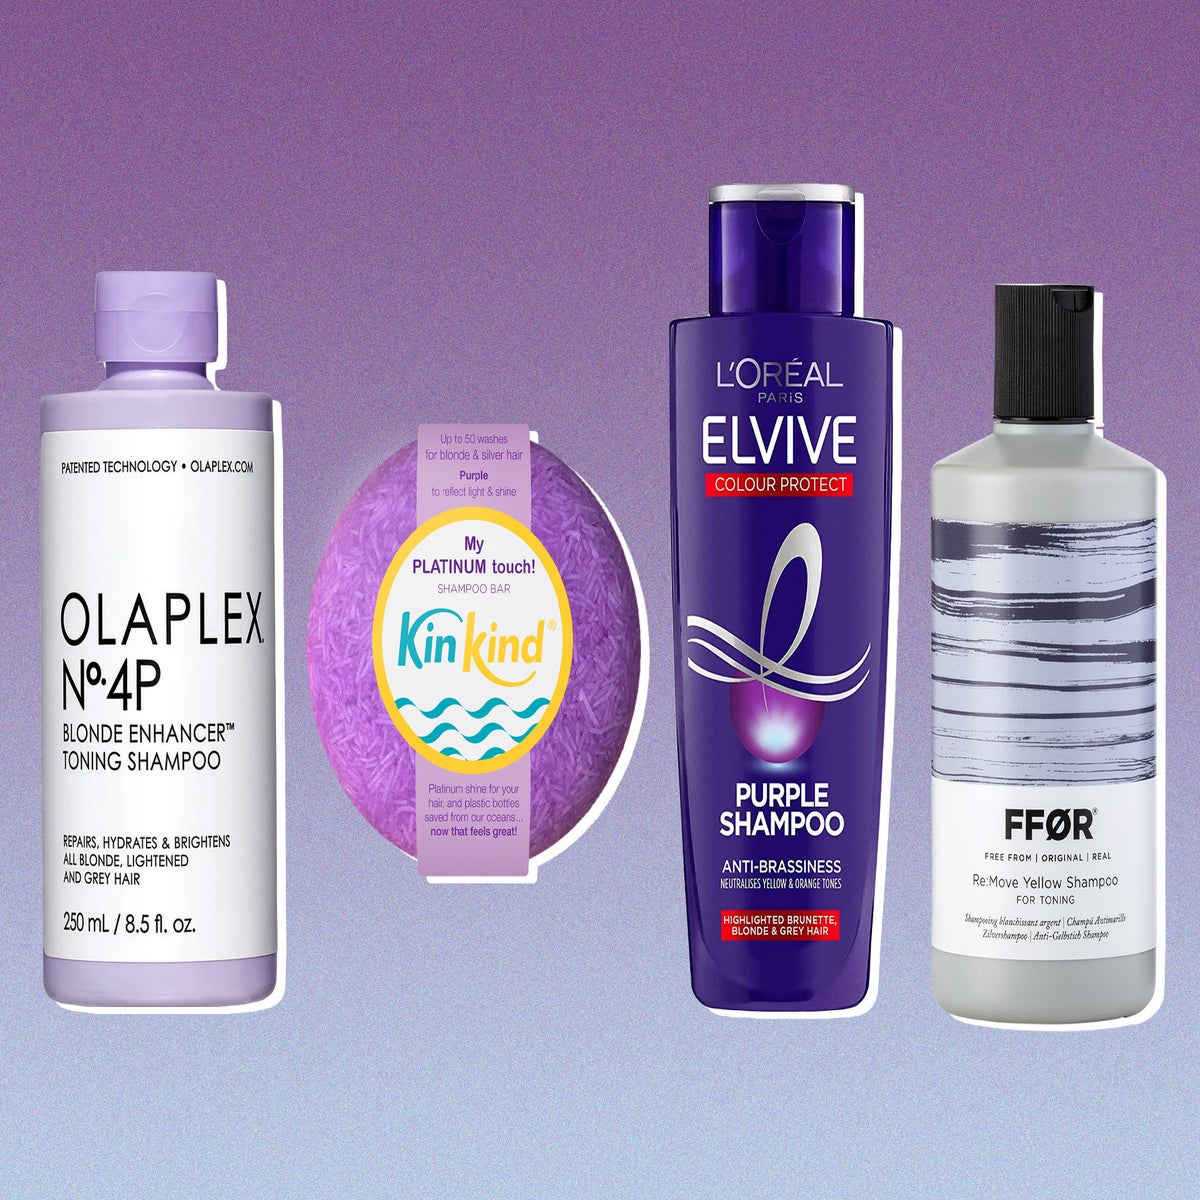 I Tested 9 Natural Purple Shampoos (Before & Afters)